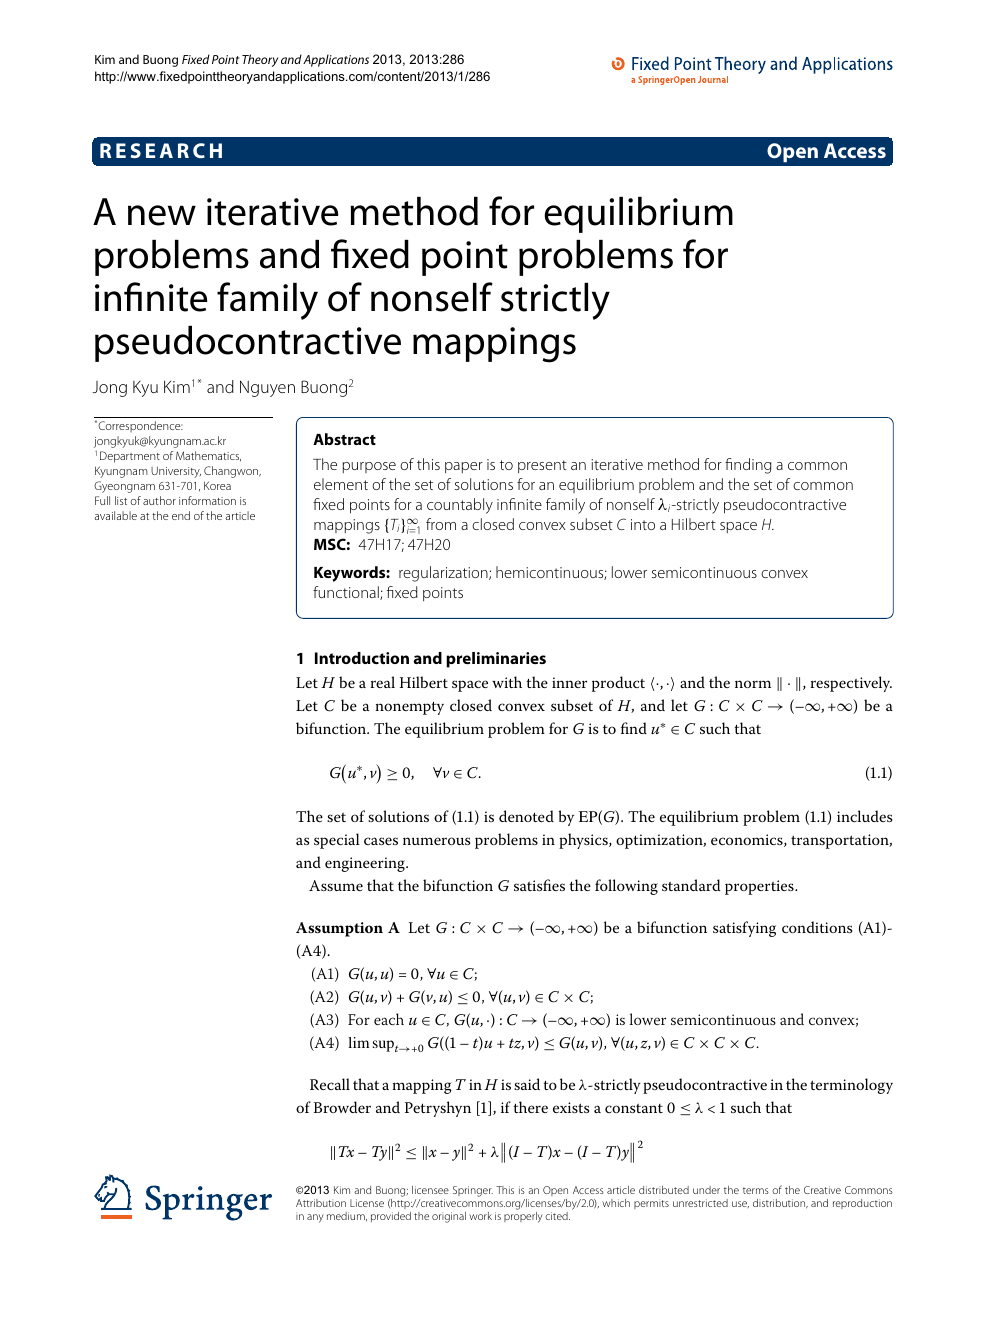 A New Iterative Method For Equilibrium Problems And Fixed Point Problems For Infinite Family Of Nonself Strictly Pseudocontractive Mappings Topic Of Research Paper In Mathematics Download Scholarly Article Pdf And Read